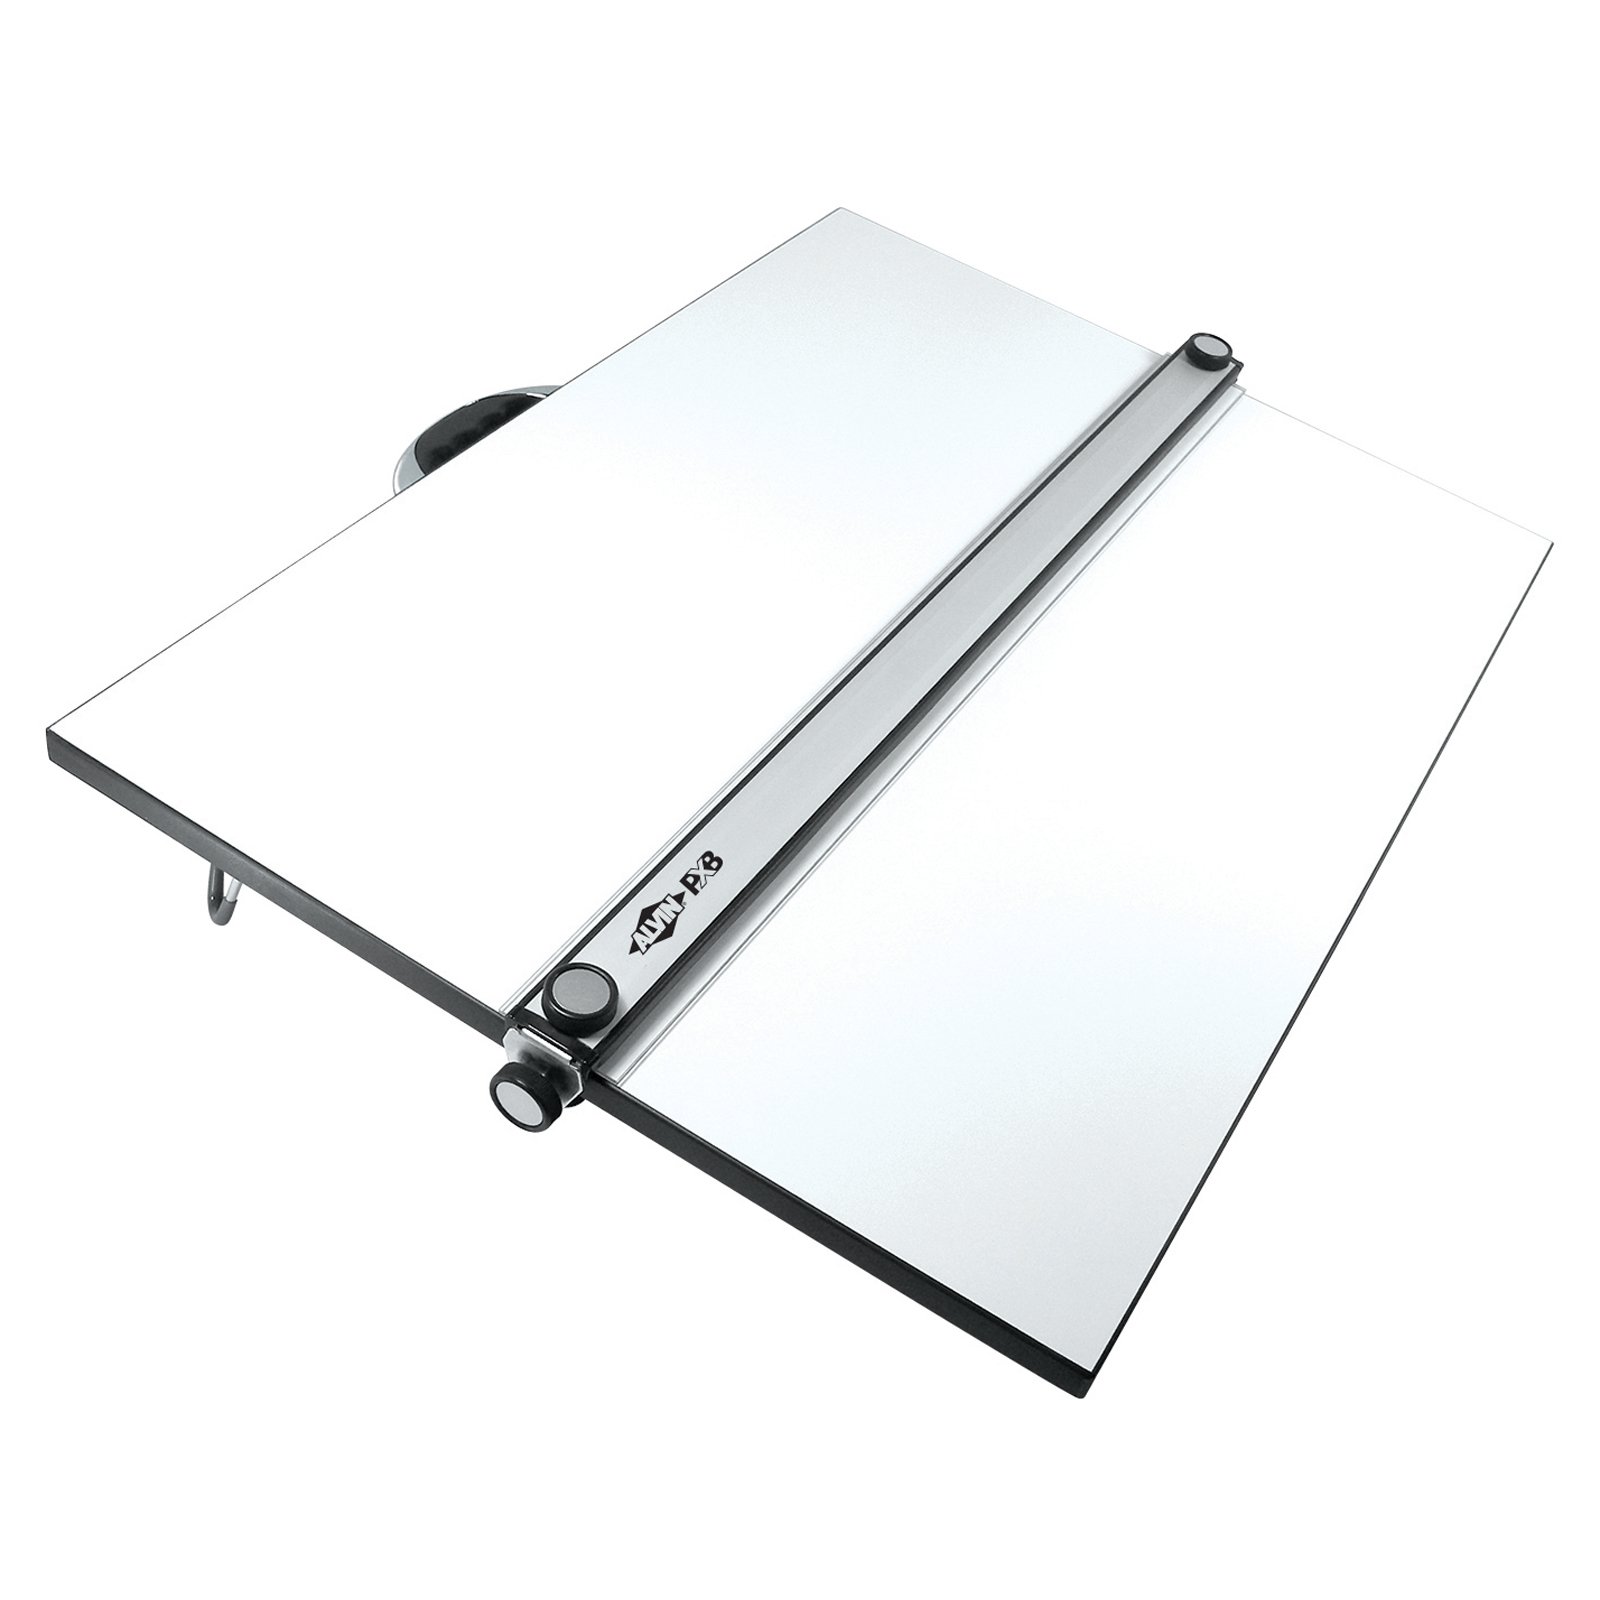 0088354059356 - PARALLEL STRAIGHTEDGE PORTABLE DRAFTING BOARD